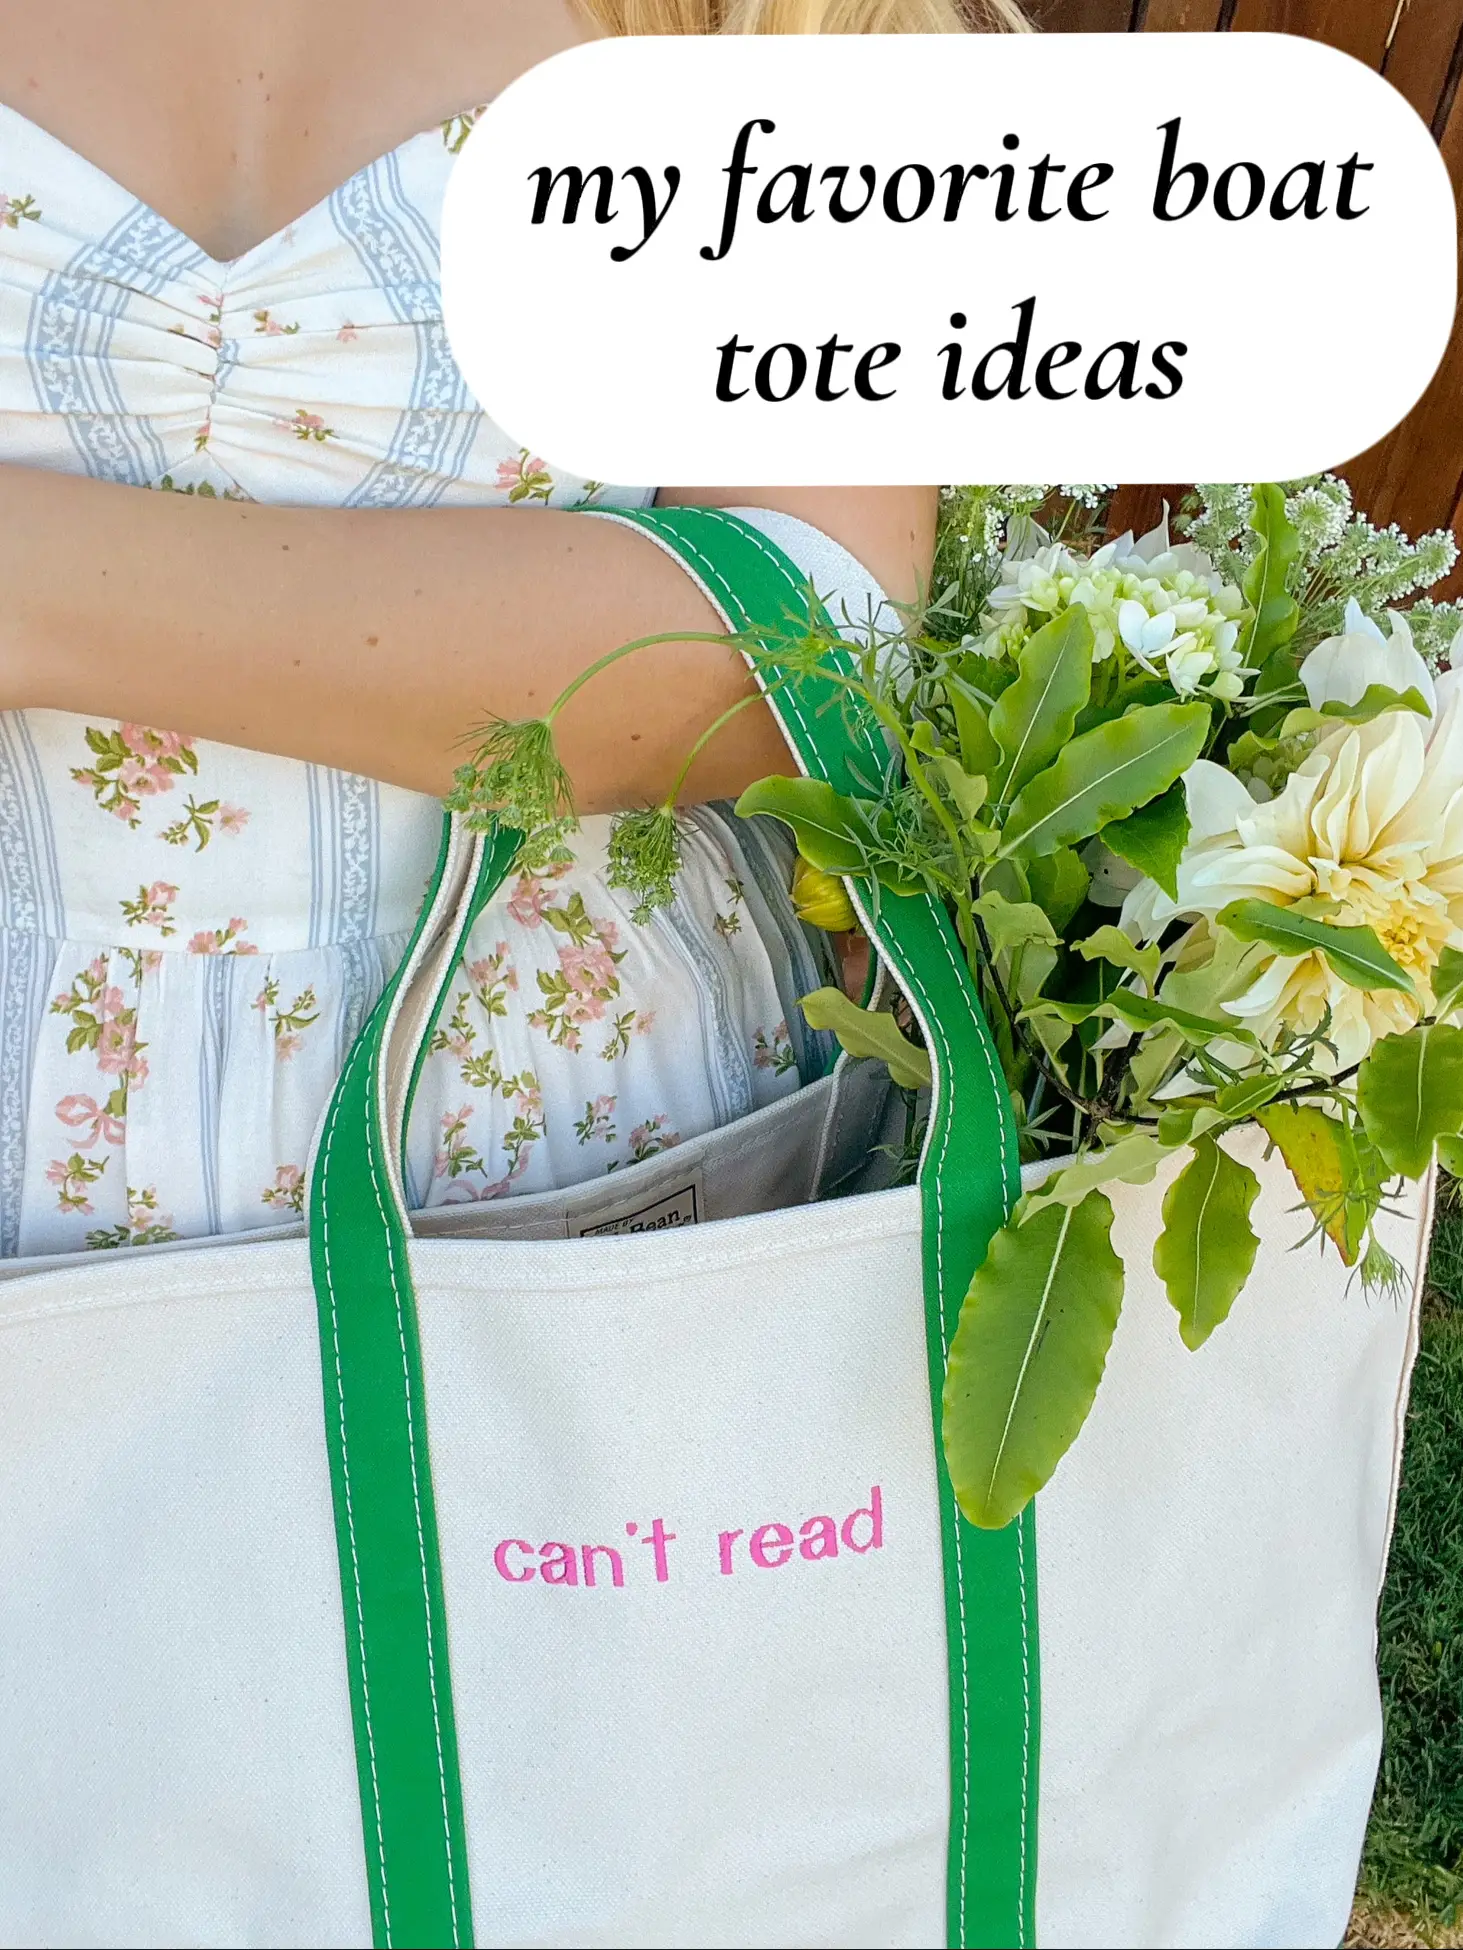 Boat Tote Ideas 💚, Gallery posted by kmfroelich